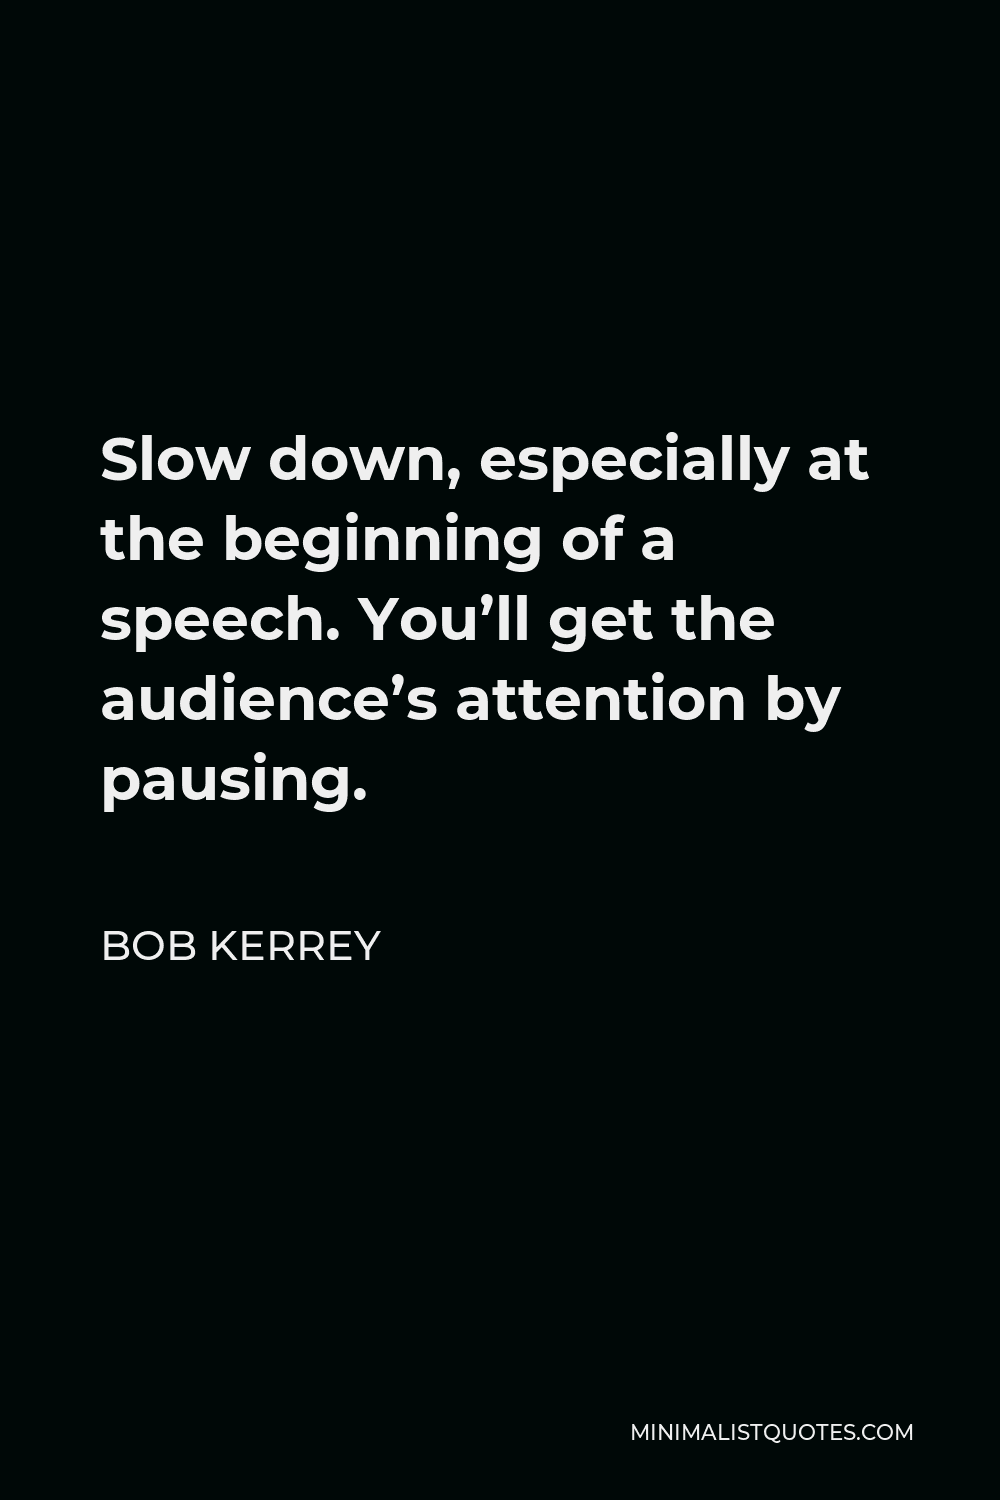 Bob Kerrey Quote - Slow down, especially at the beginning of a speech. You’ll get the audience’s attention by pausing.